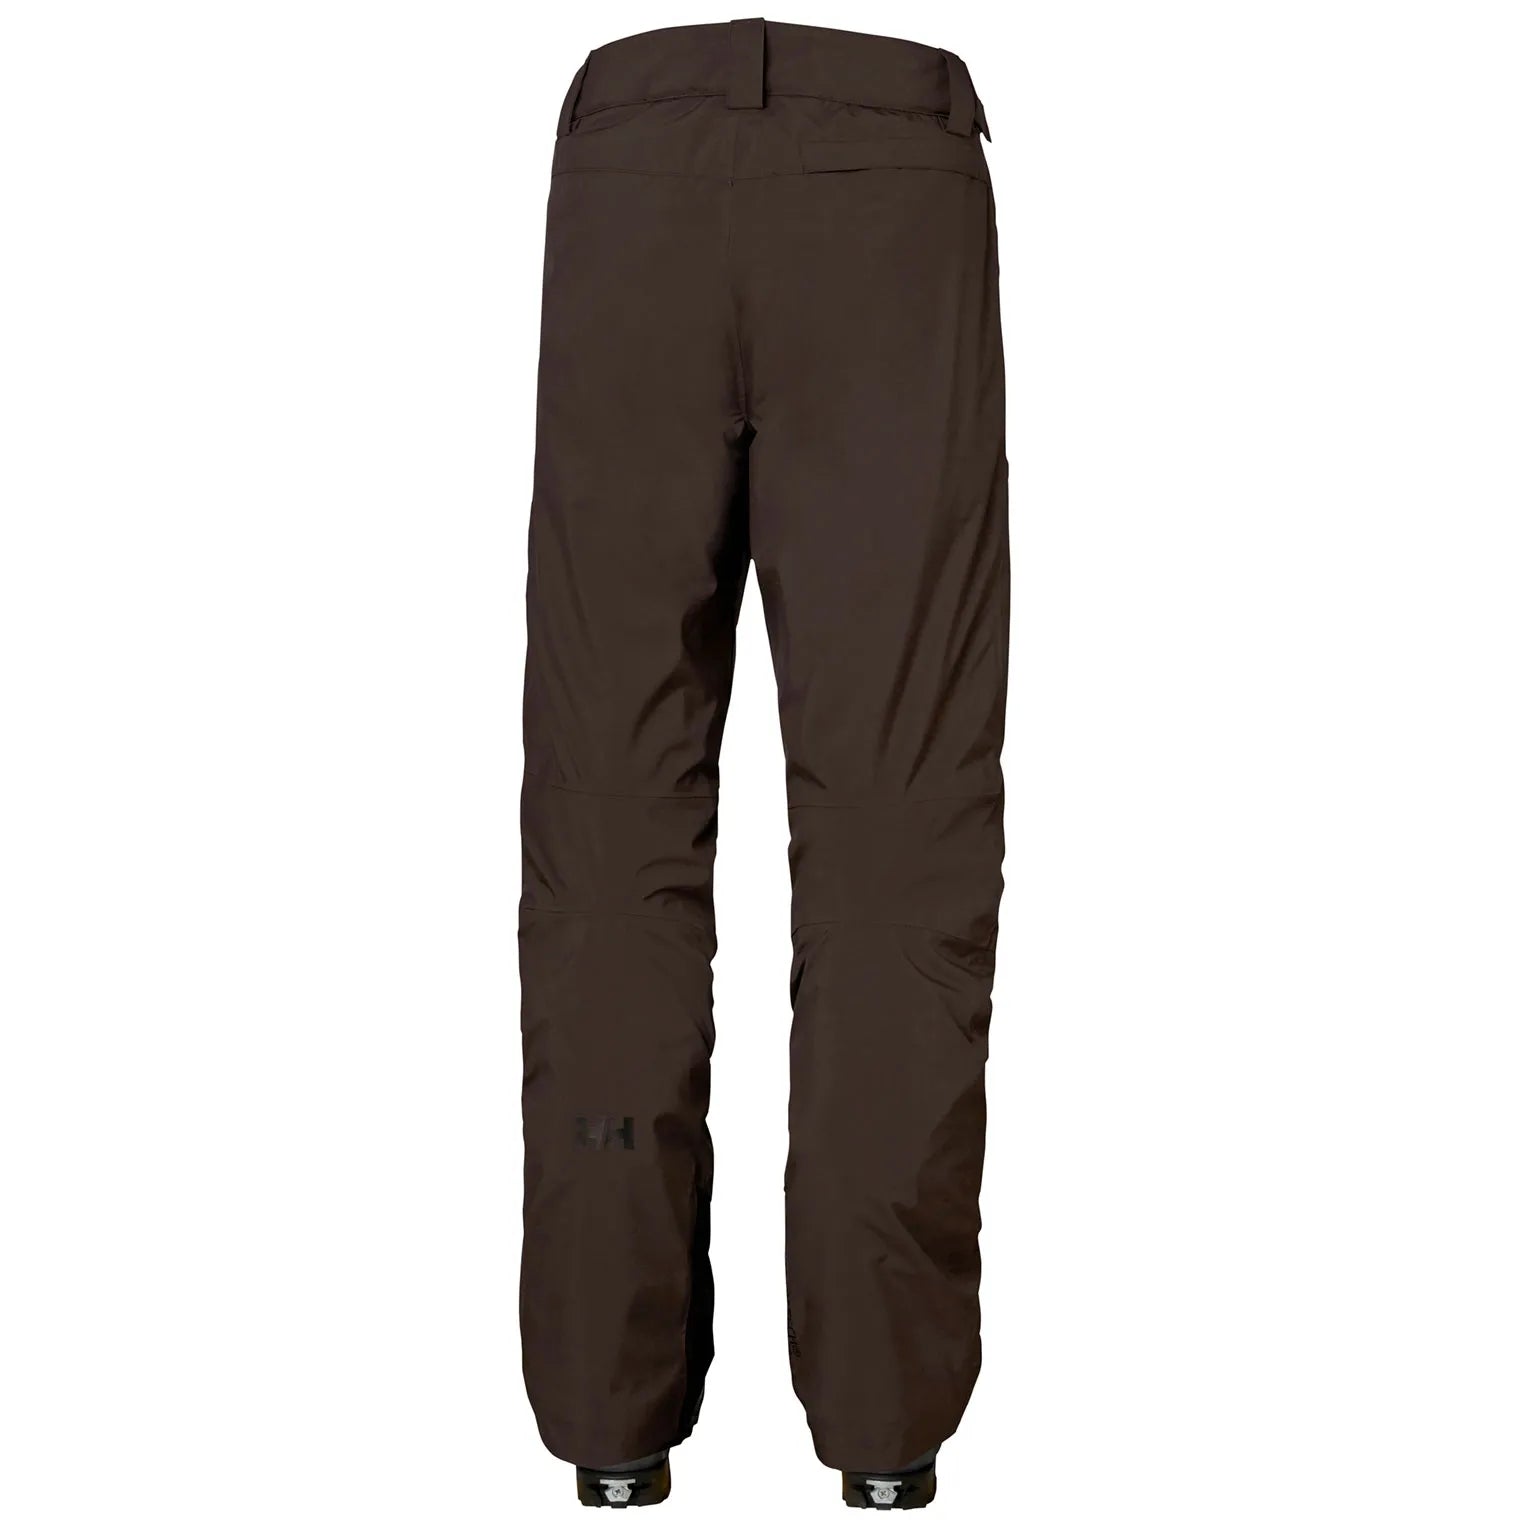 Helly Hansen Legendary Insulated Pant Triple Espresso - FULLSEND SKI AND OUTDOOR